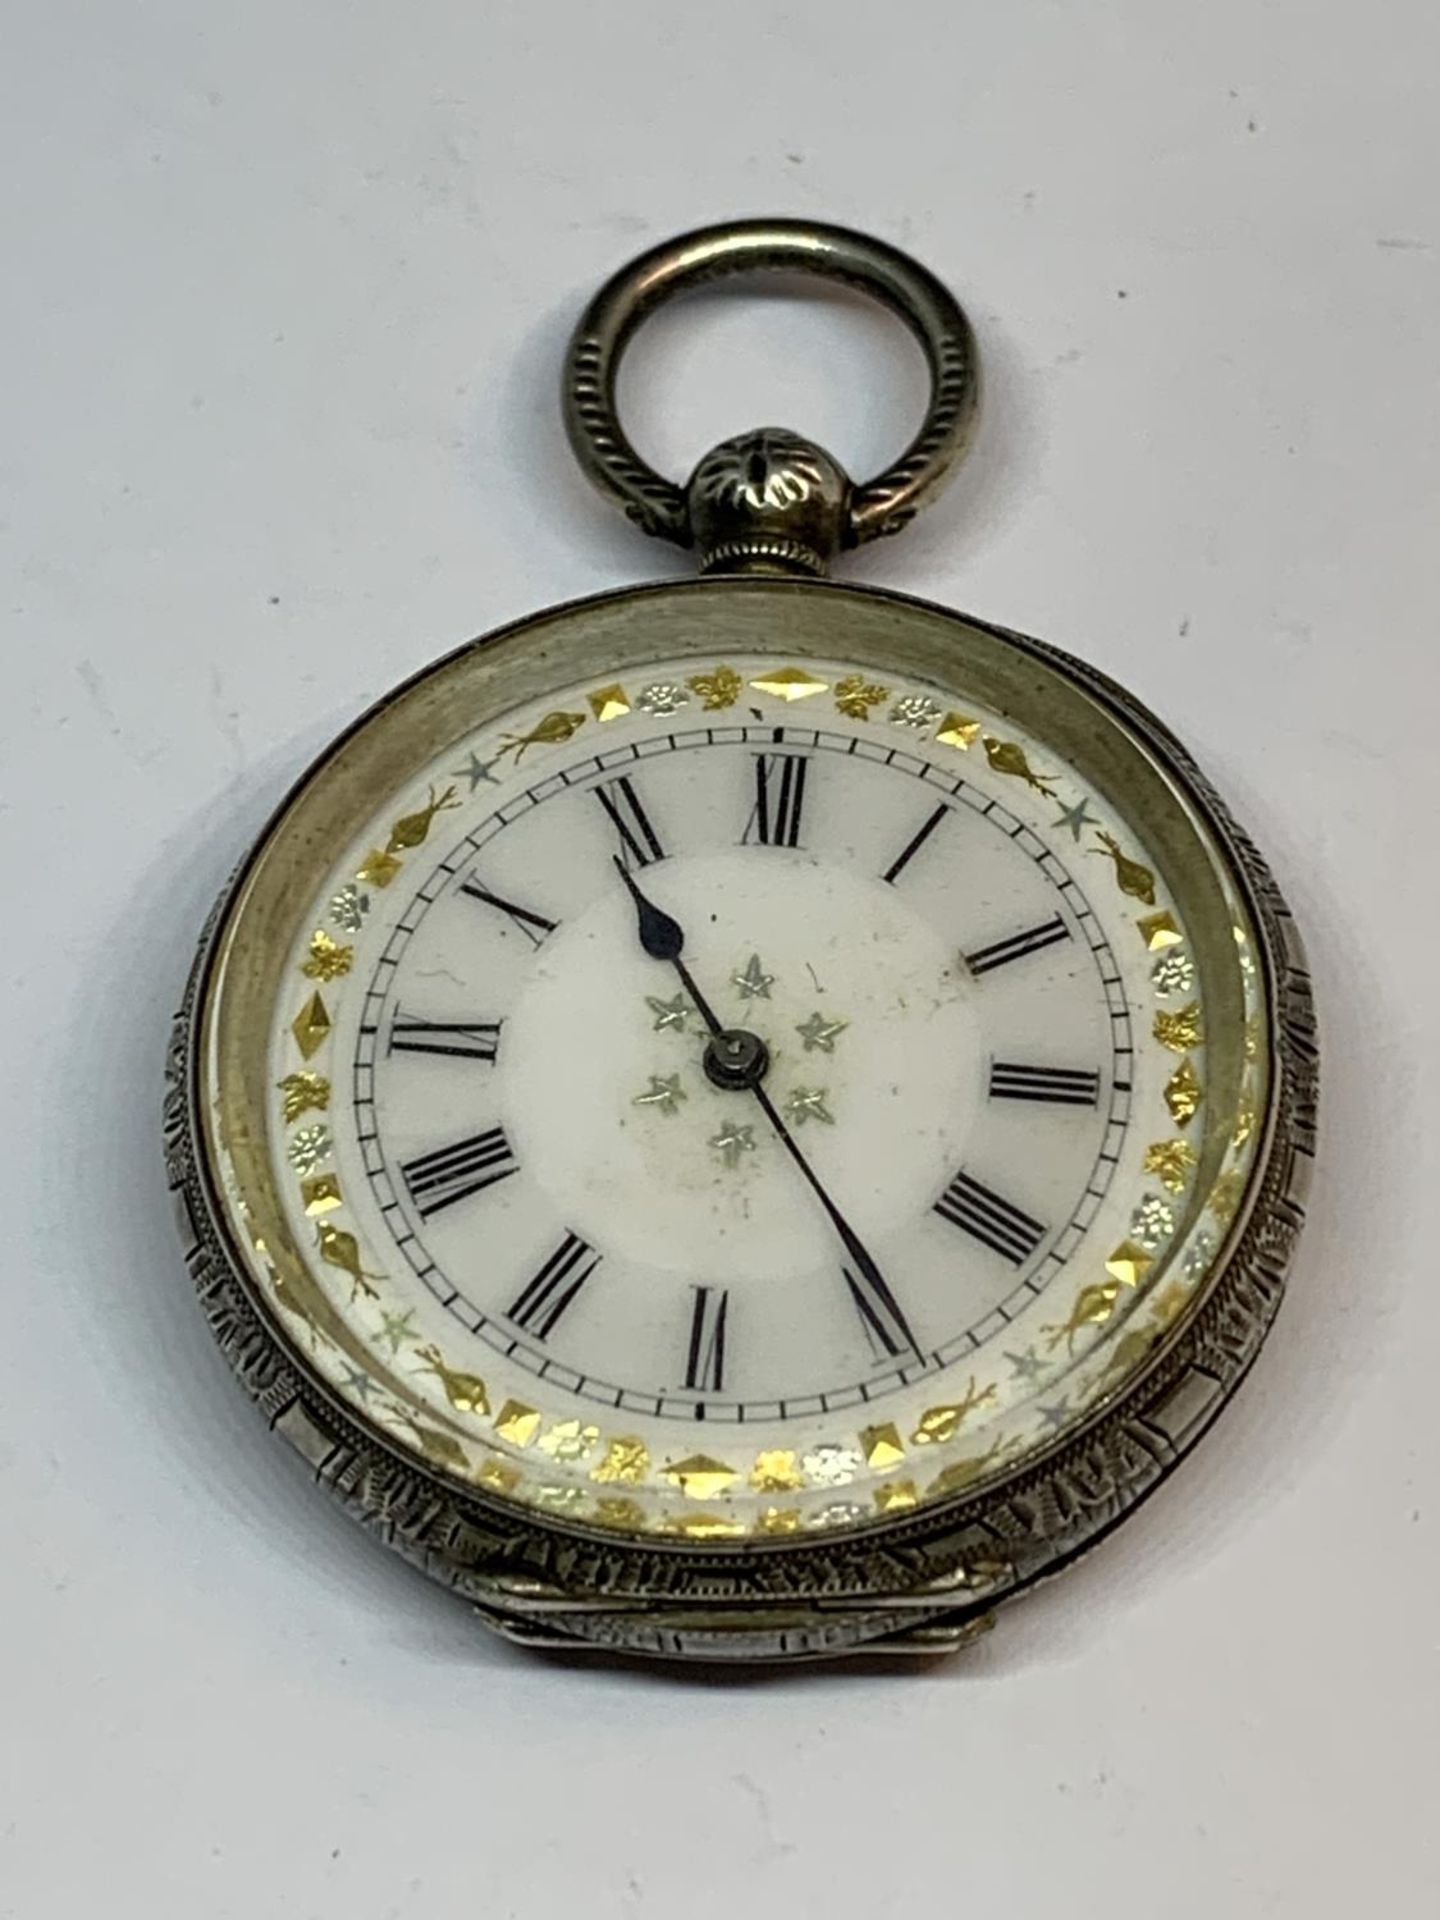 A MARKED 935 SILVER FOB WATCH WITH DECORATIVE ENAMEL FACE